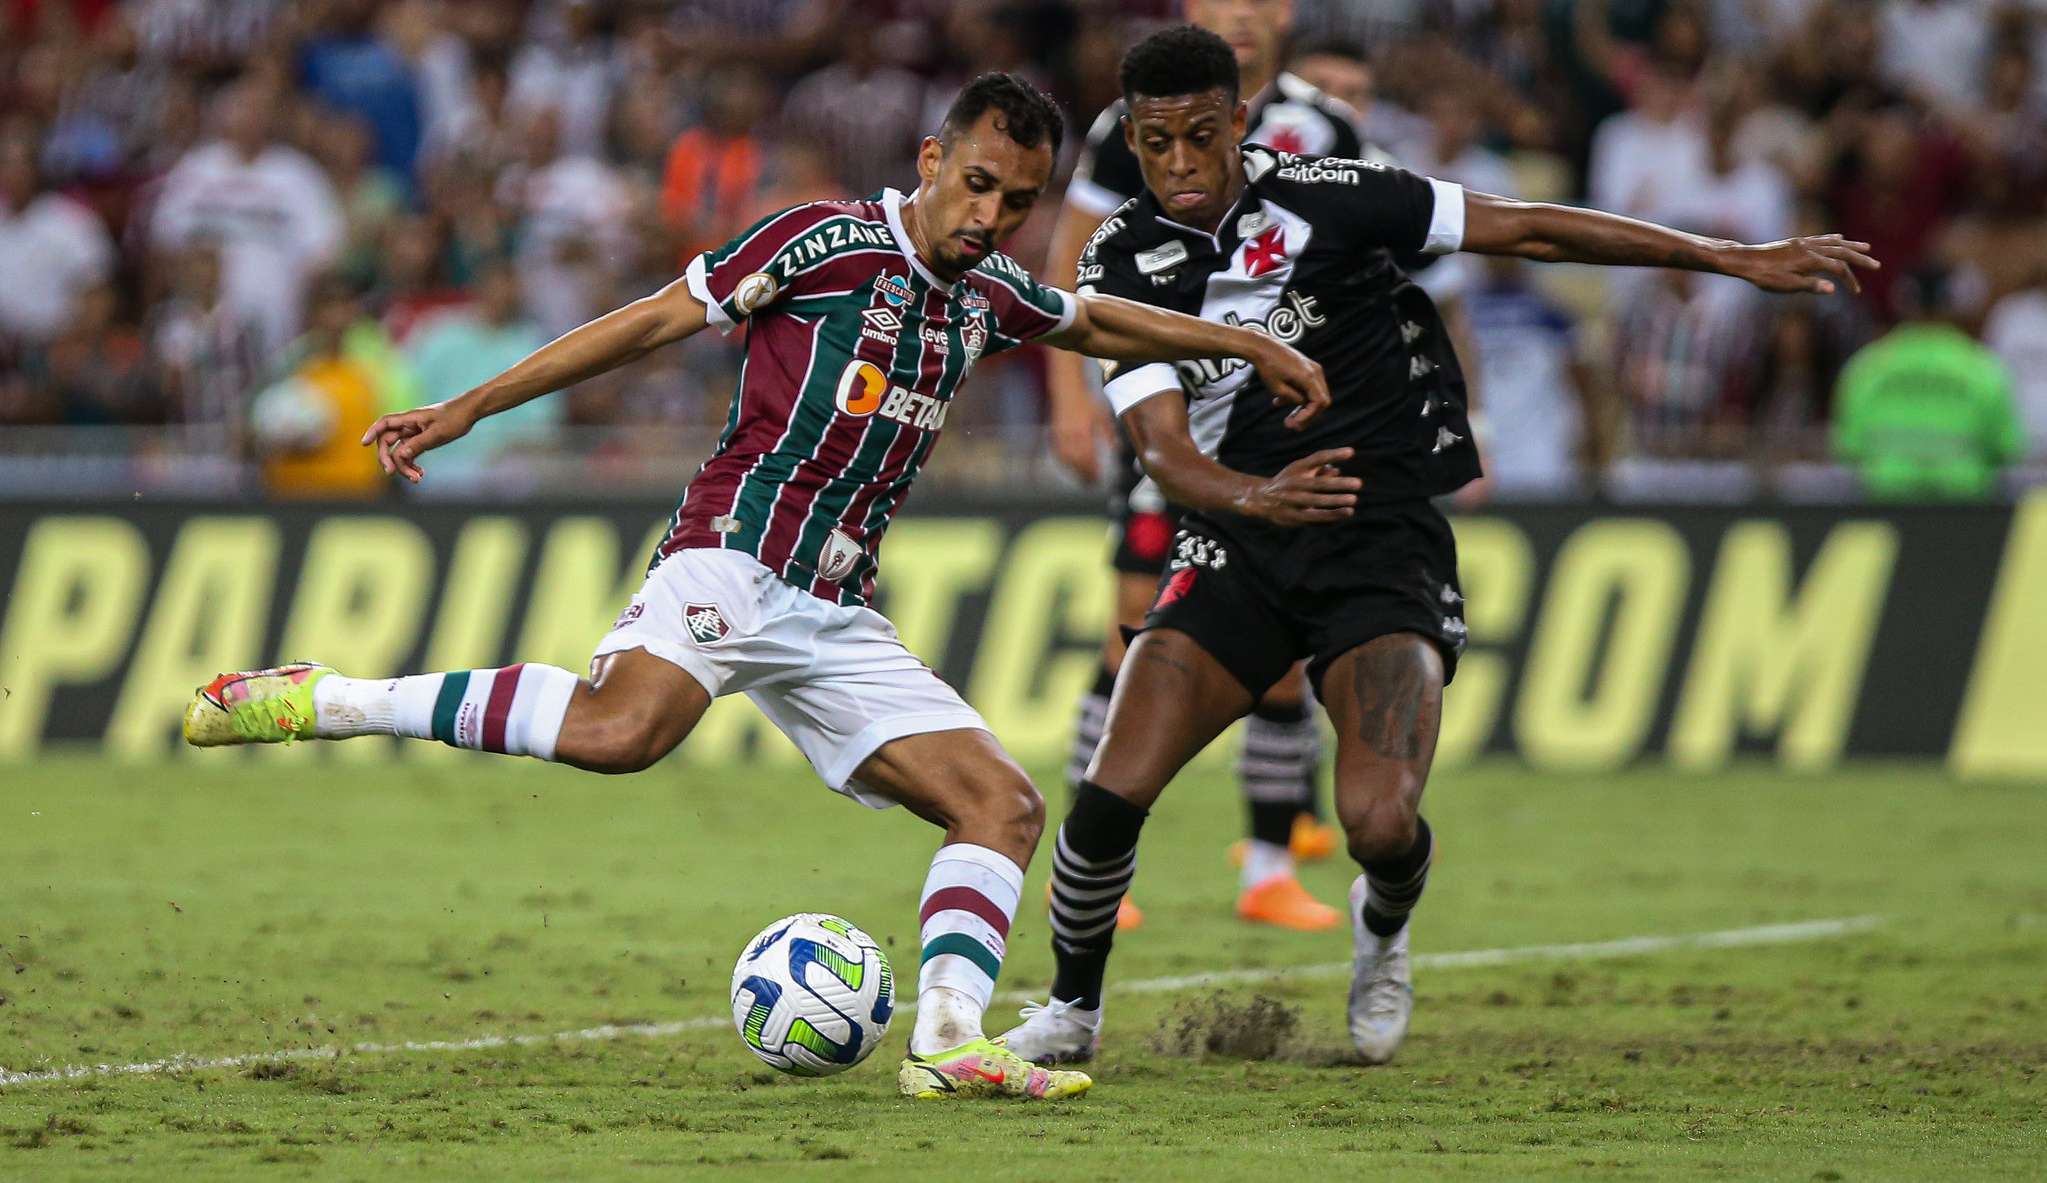 Fluminense presses, but ends up drawing with Vasco